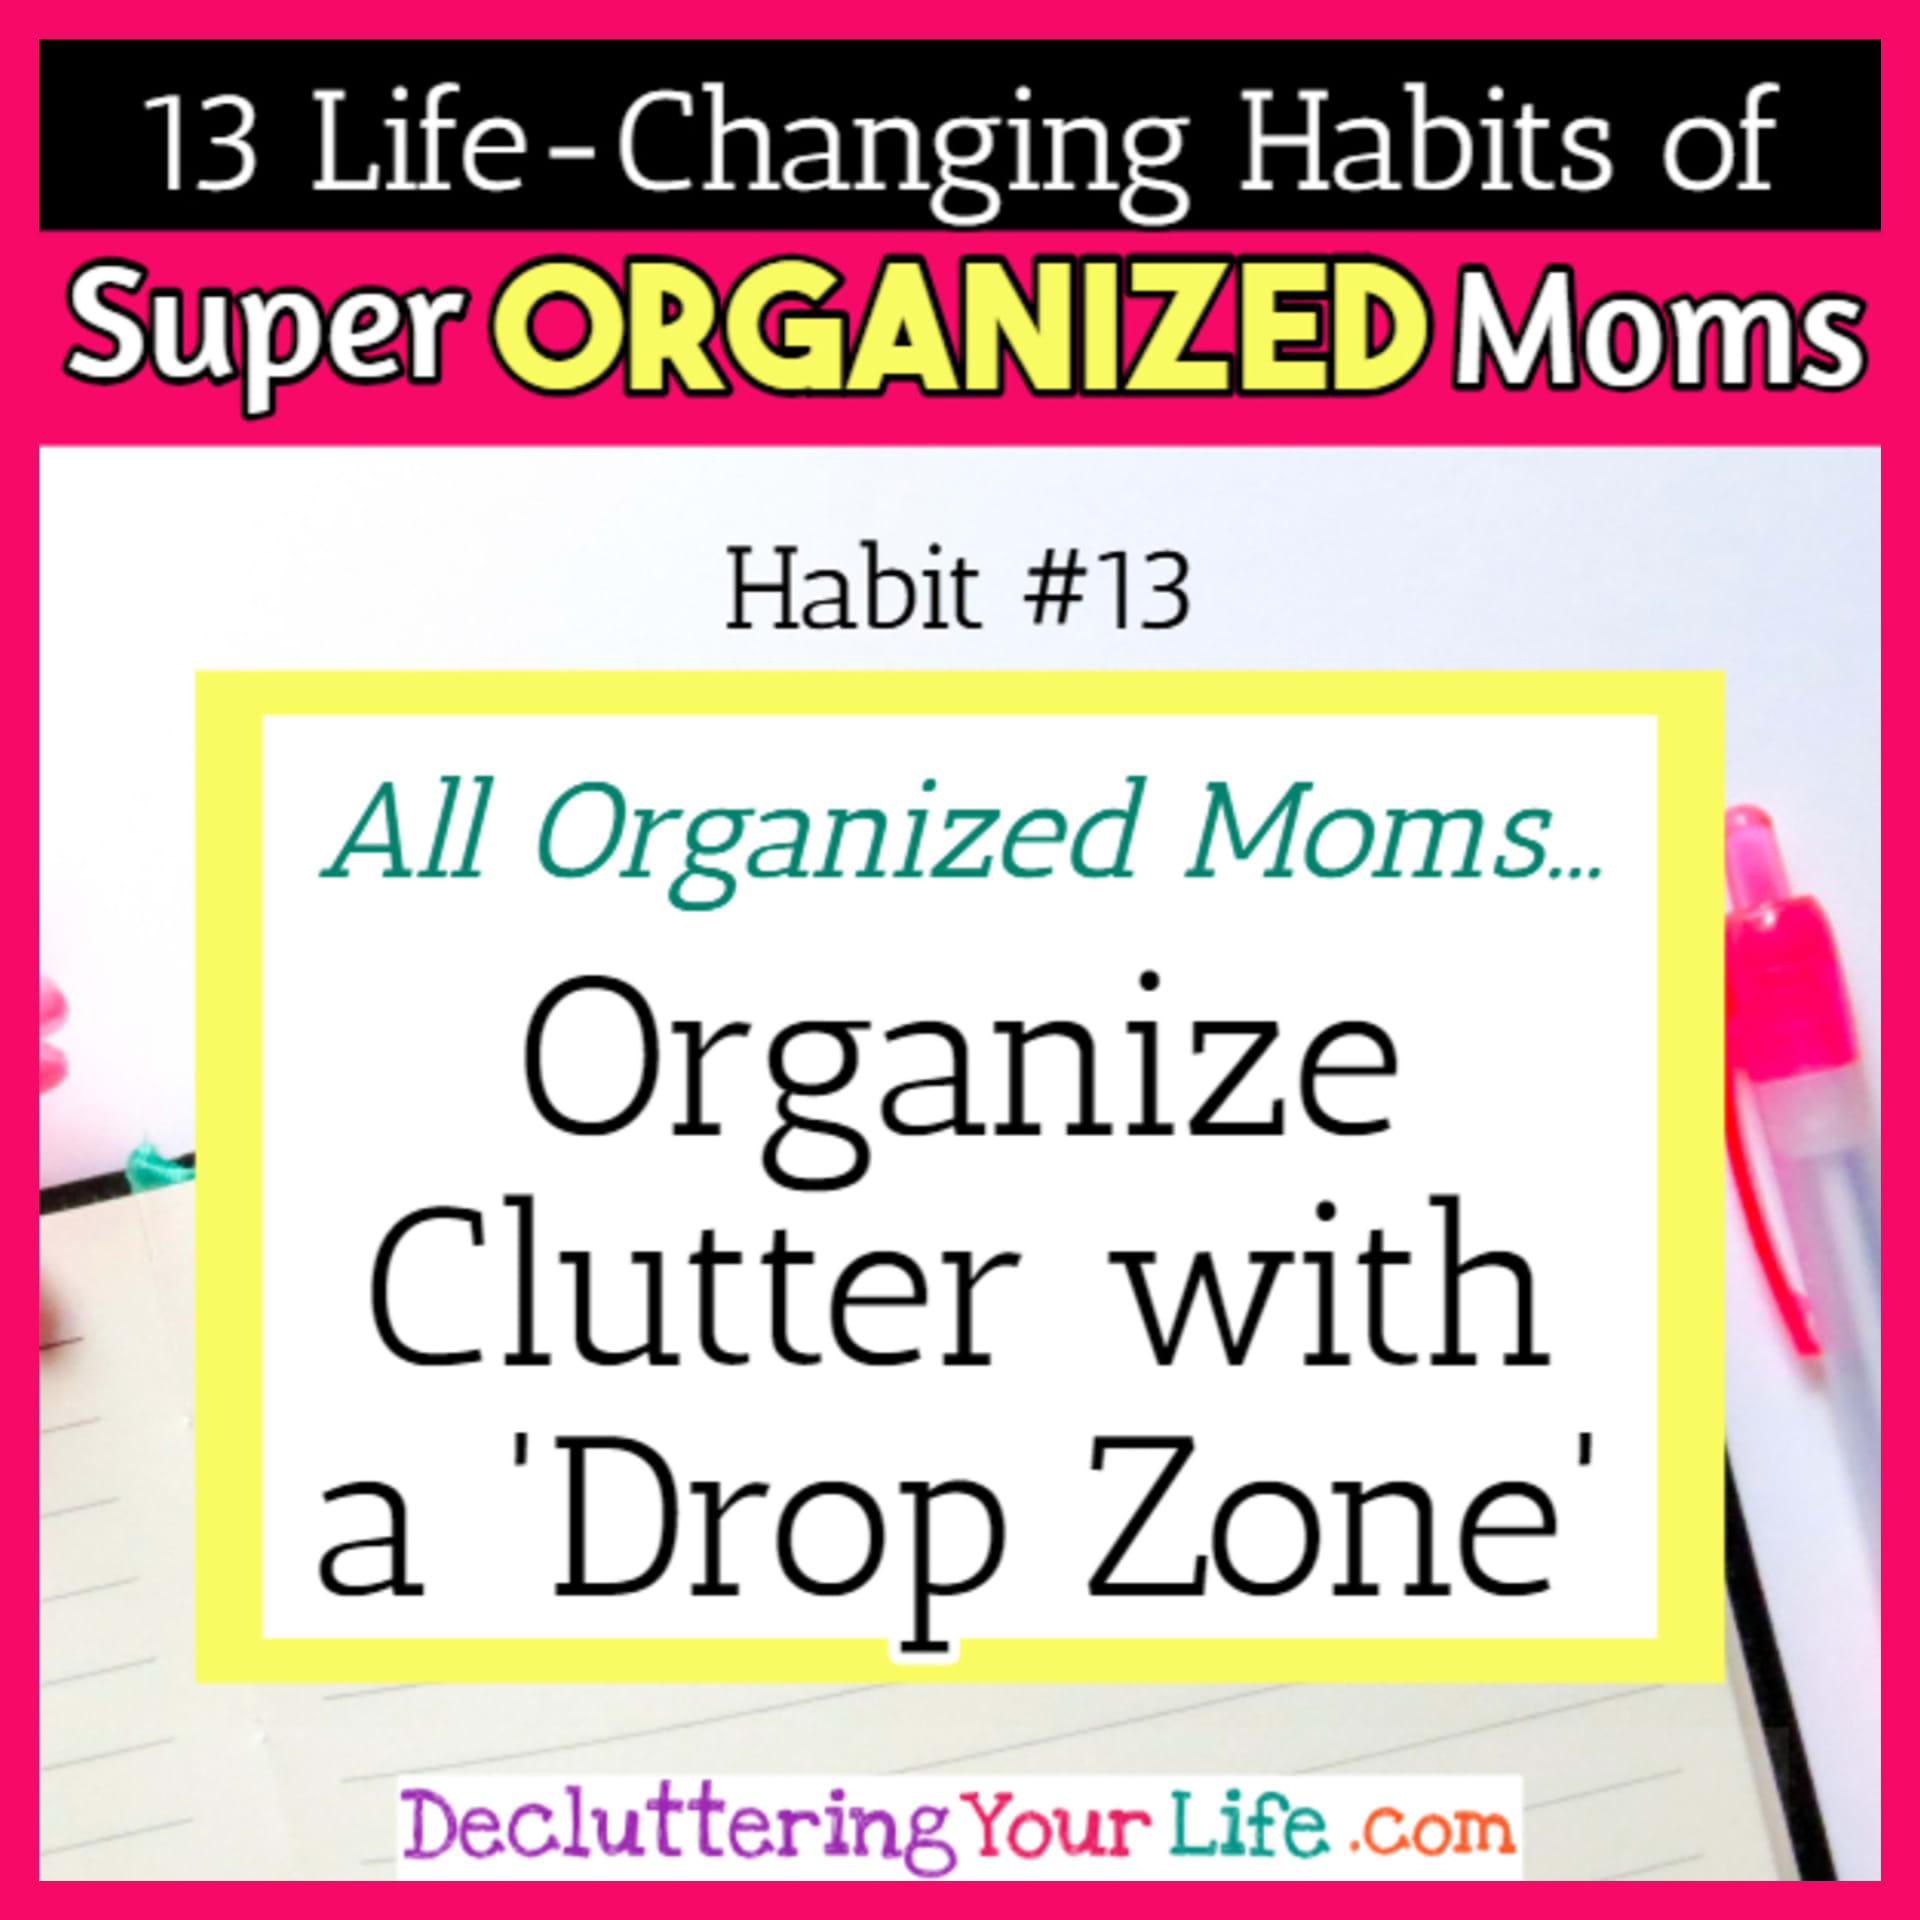 Organized moms organize clutter with a family drop zone - 13 Habits of Super Organized Mom - How To Be An Organized Mom (whether you work OR stay at home)